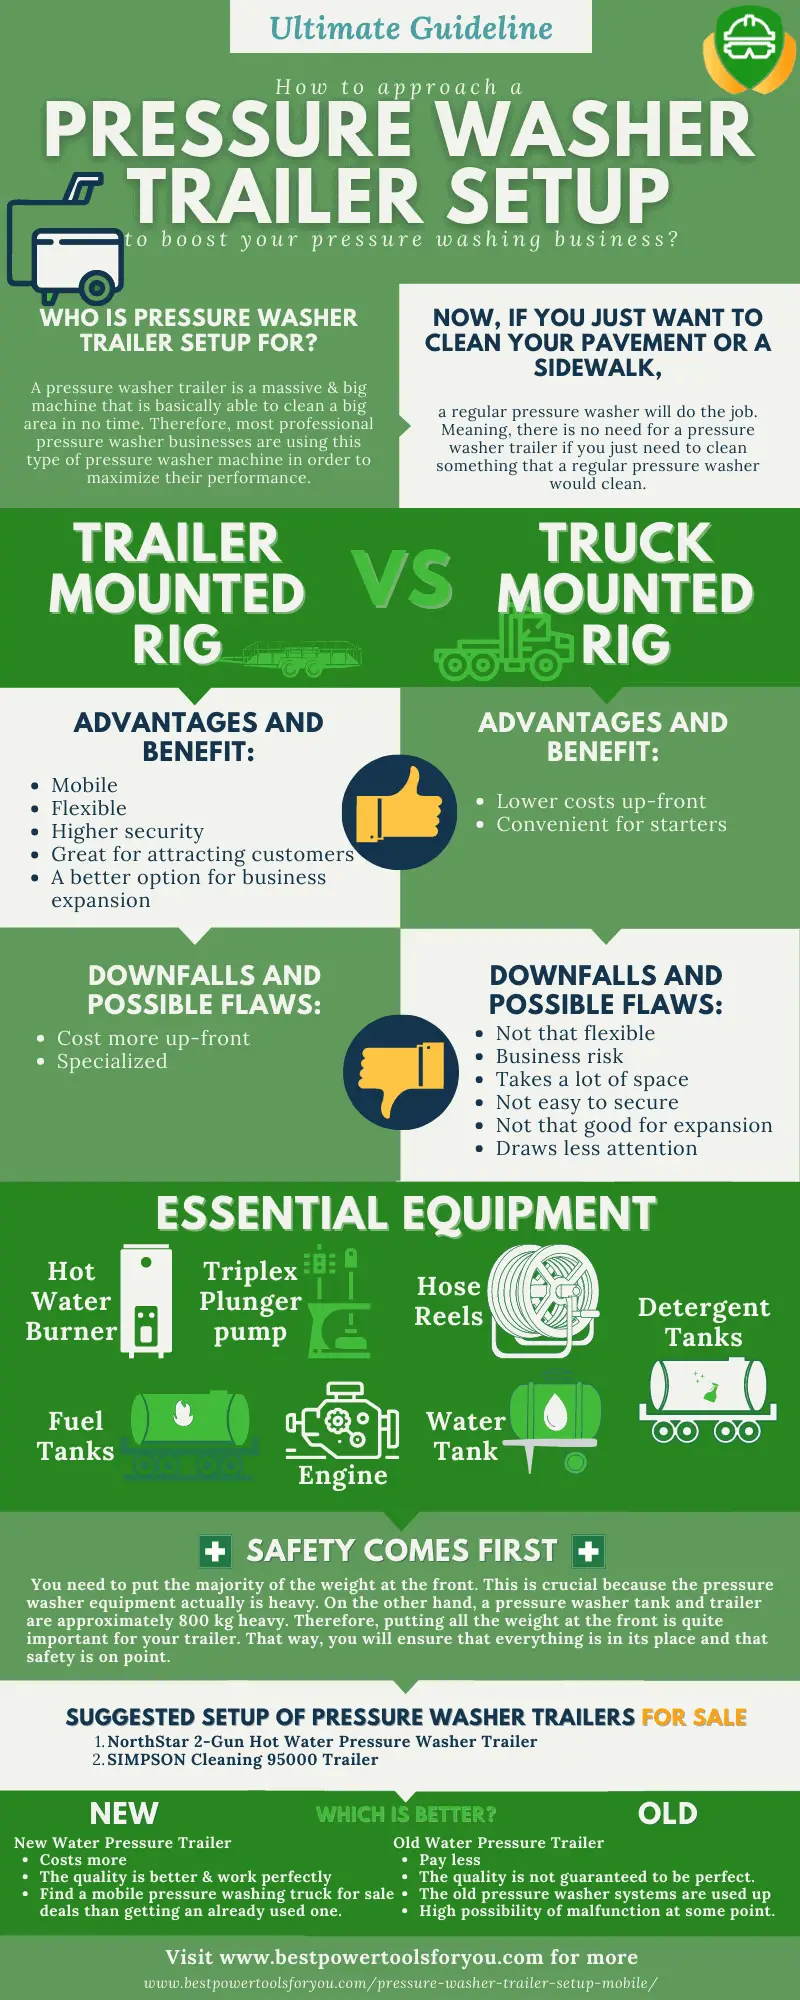 Infographic of setting up a pressure washer trailer